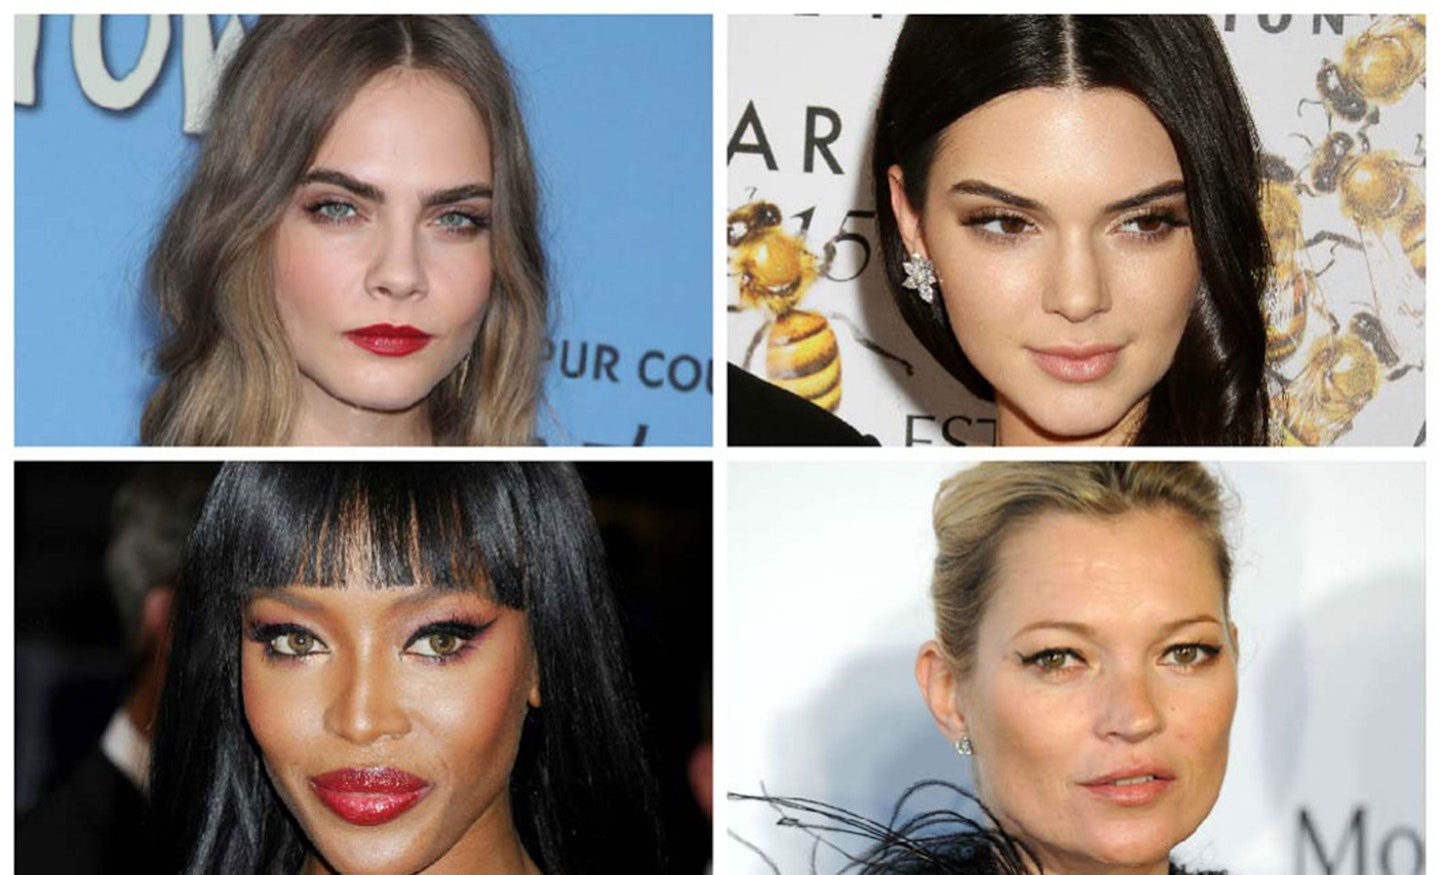 Who Is The World's Most Connected Supermodel? [All Images: Rex]